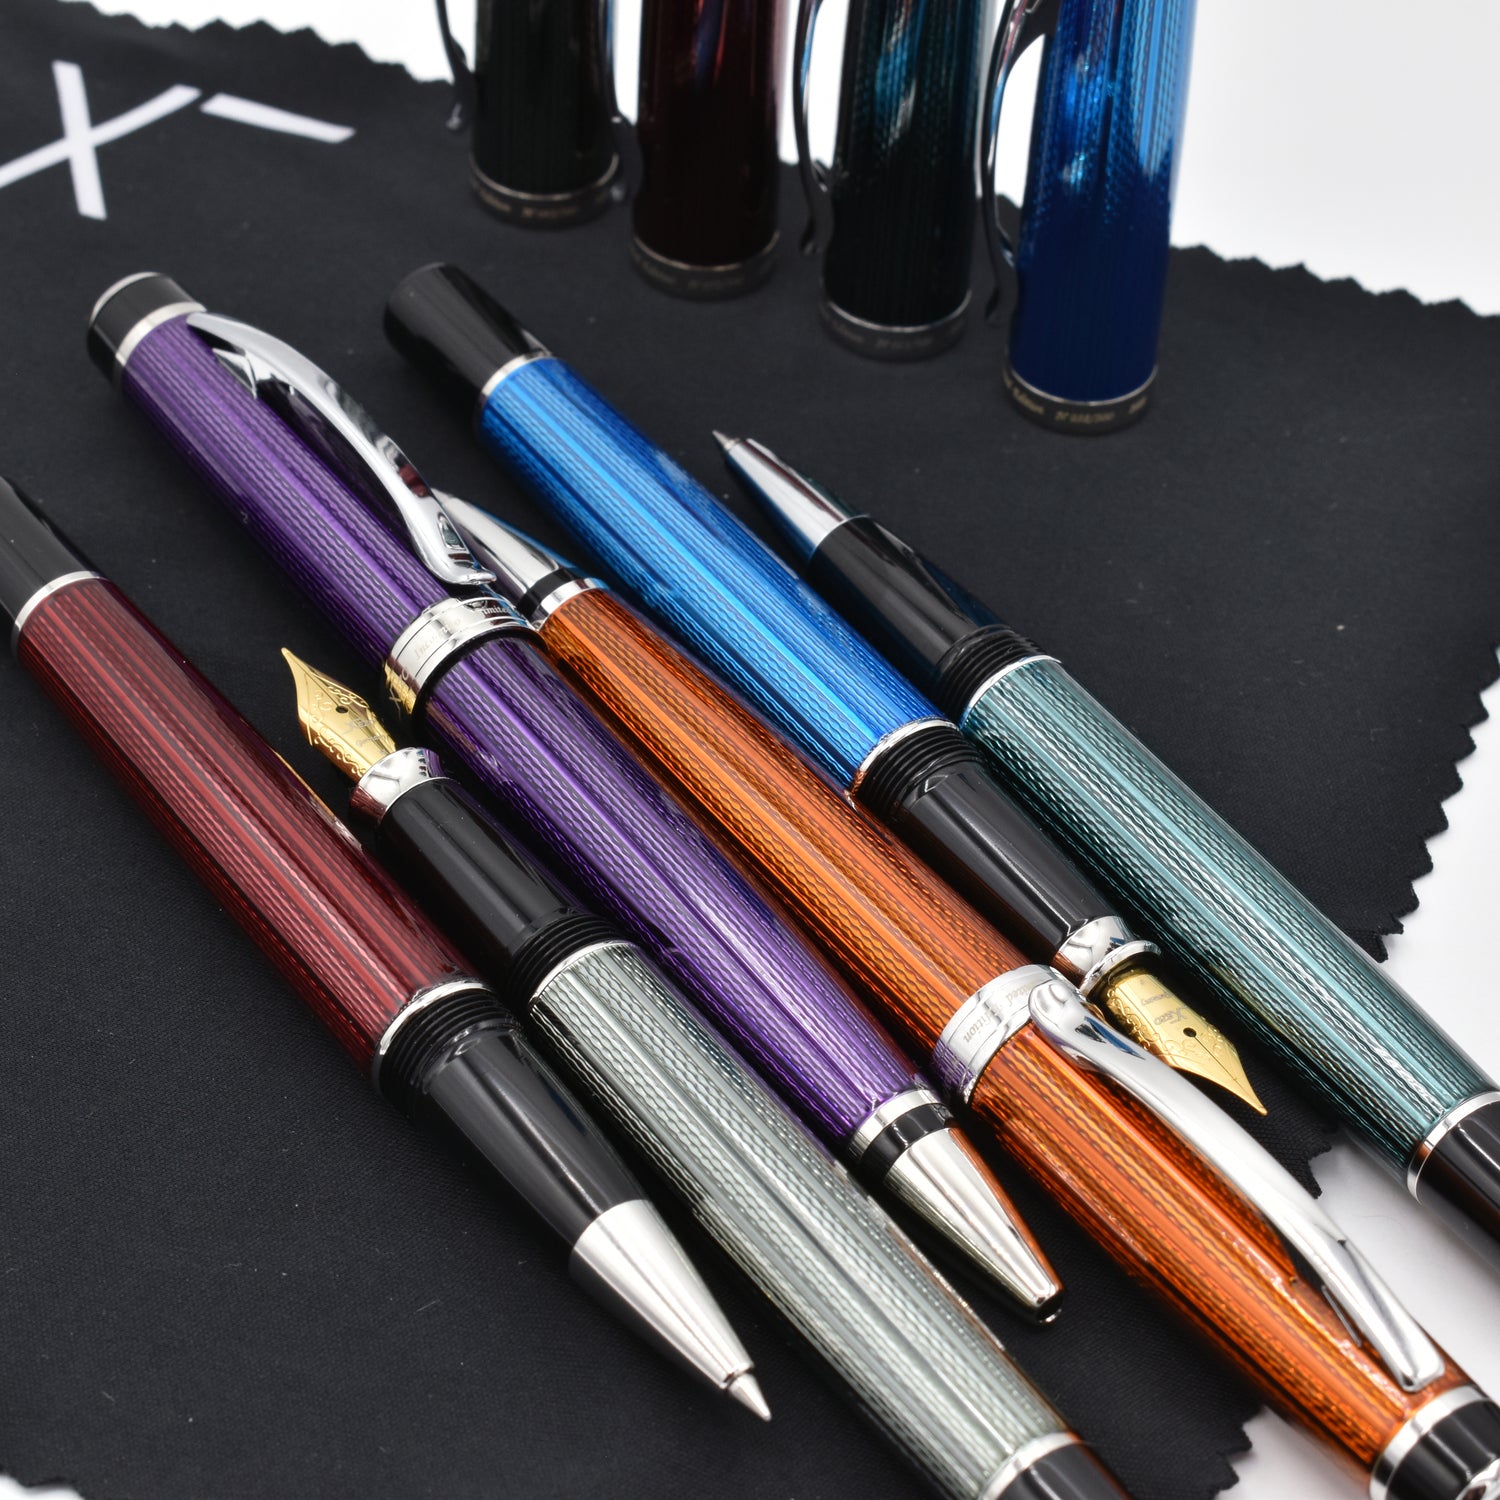 A collection of Xezo Incognito pens laid next to each other on a black cleaning cloth